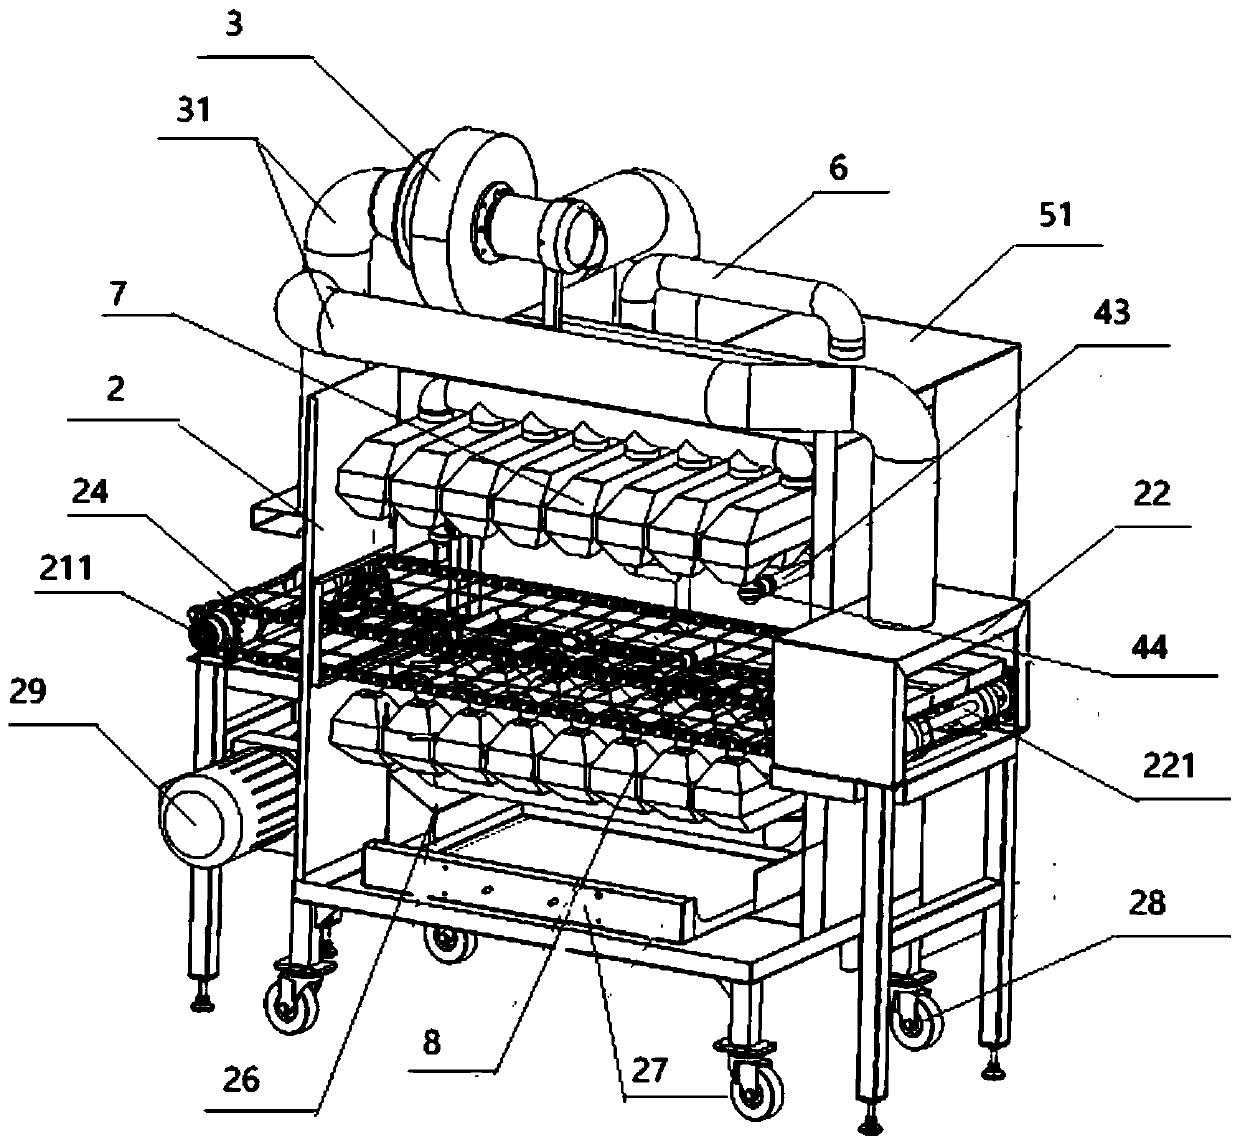 Device for flexibly processing food through superheated steam